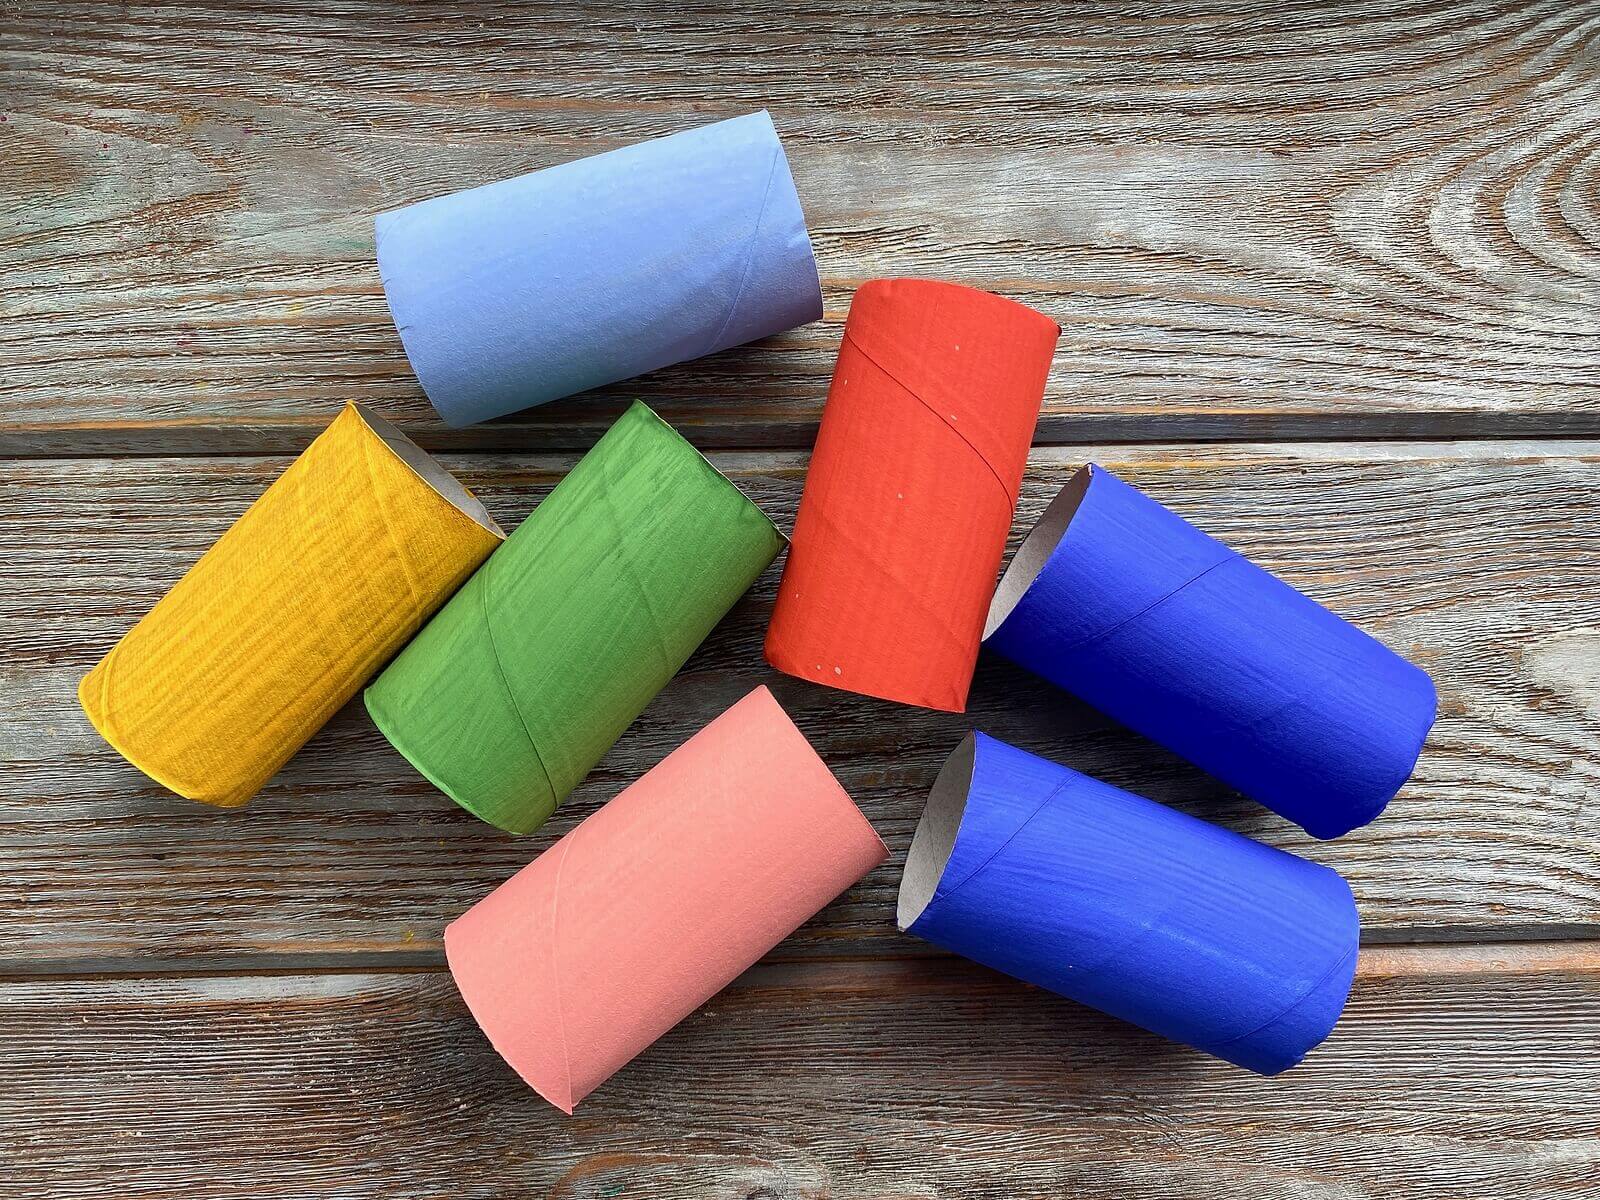 Toilet roll tubes painted in various block colours, presented on a wooden table.